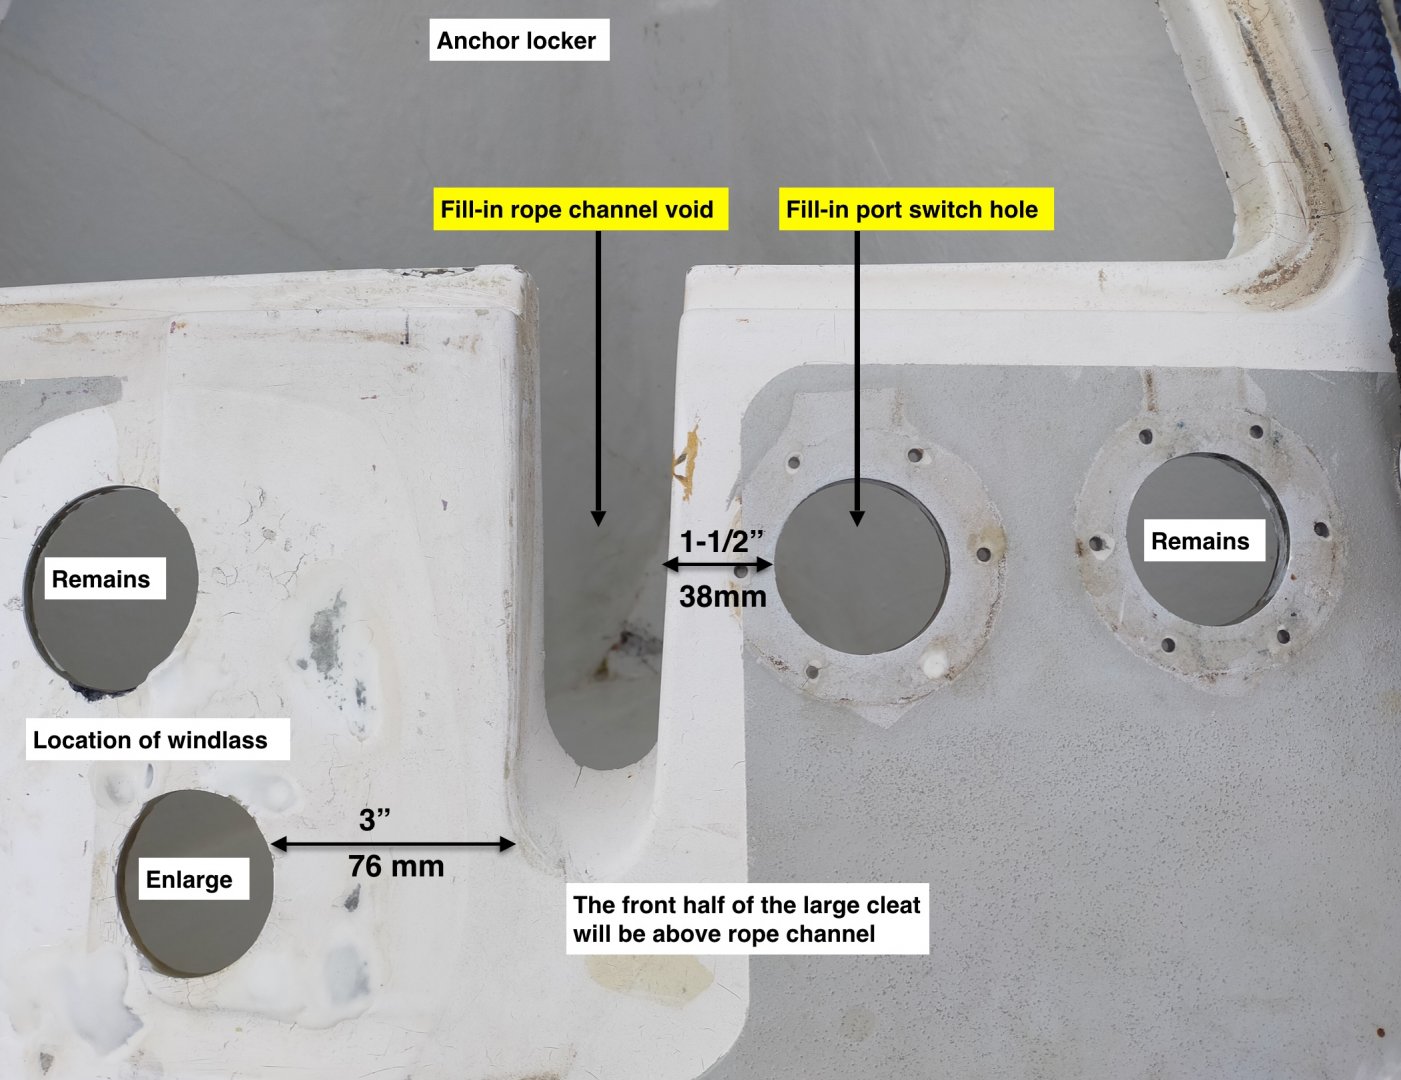 Rope void switch hole measurements.jpeg